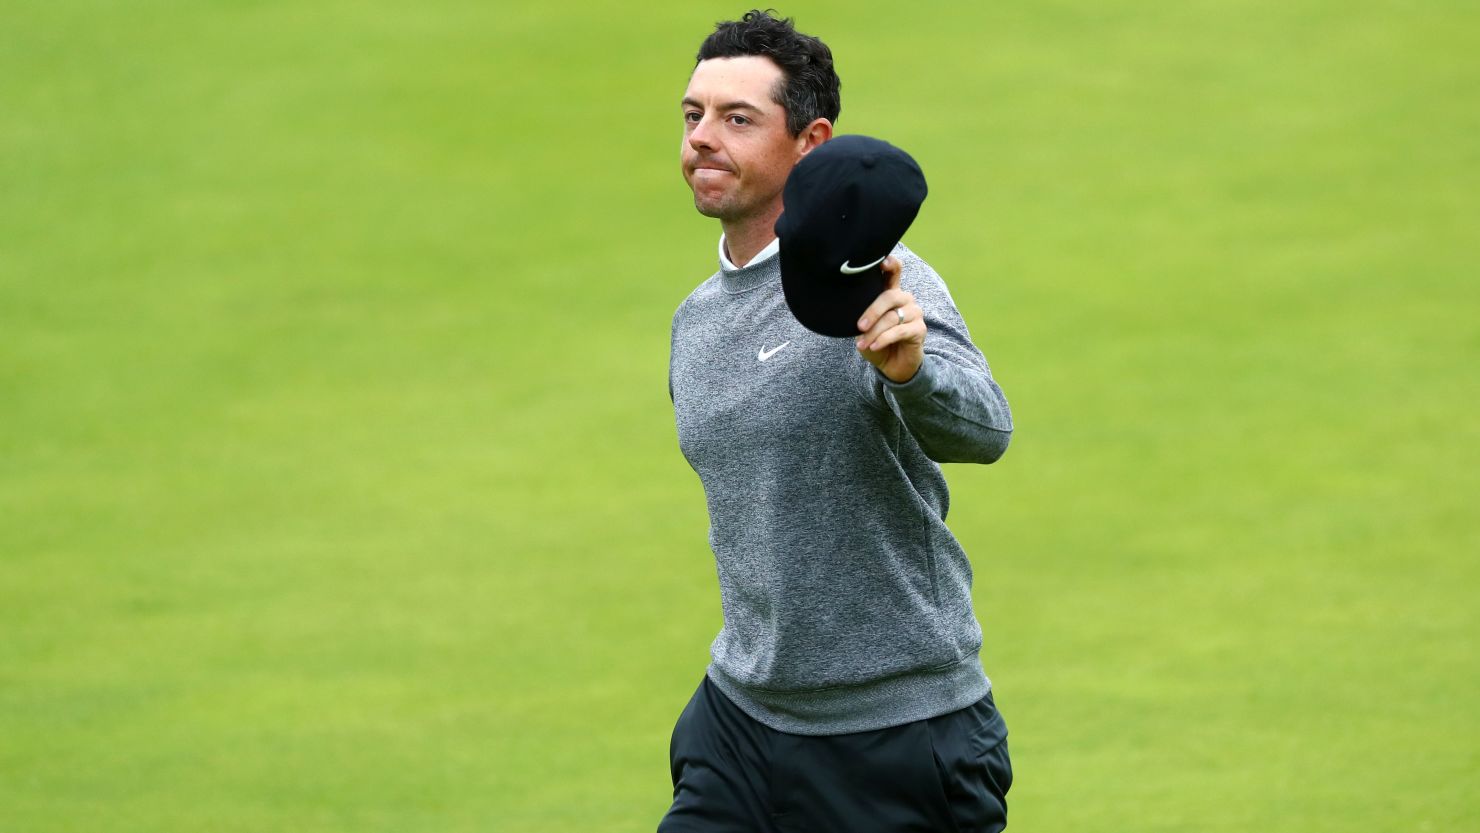 Rory McIlroy carried home hopes in the Open Championship at Royal Portrush. 